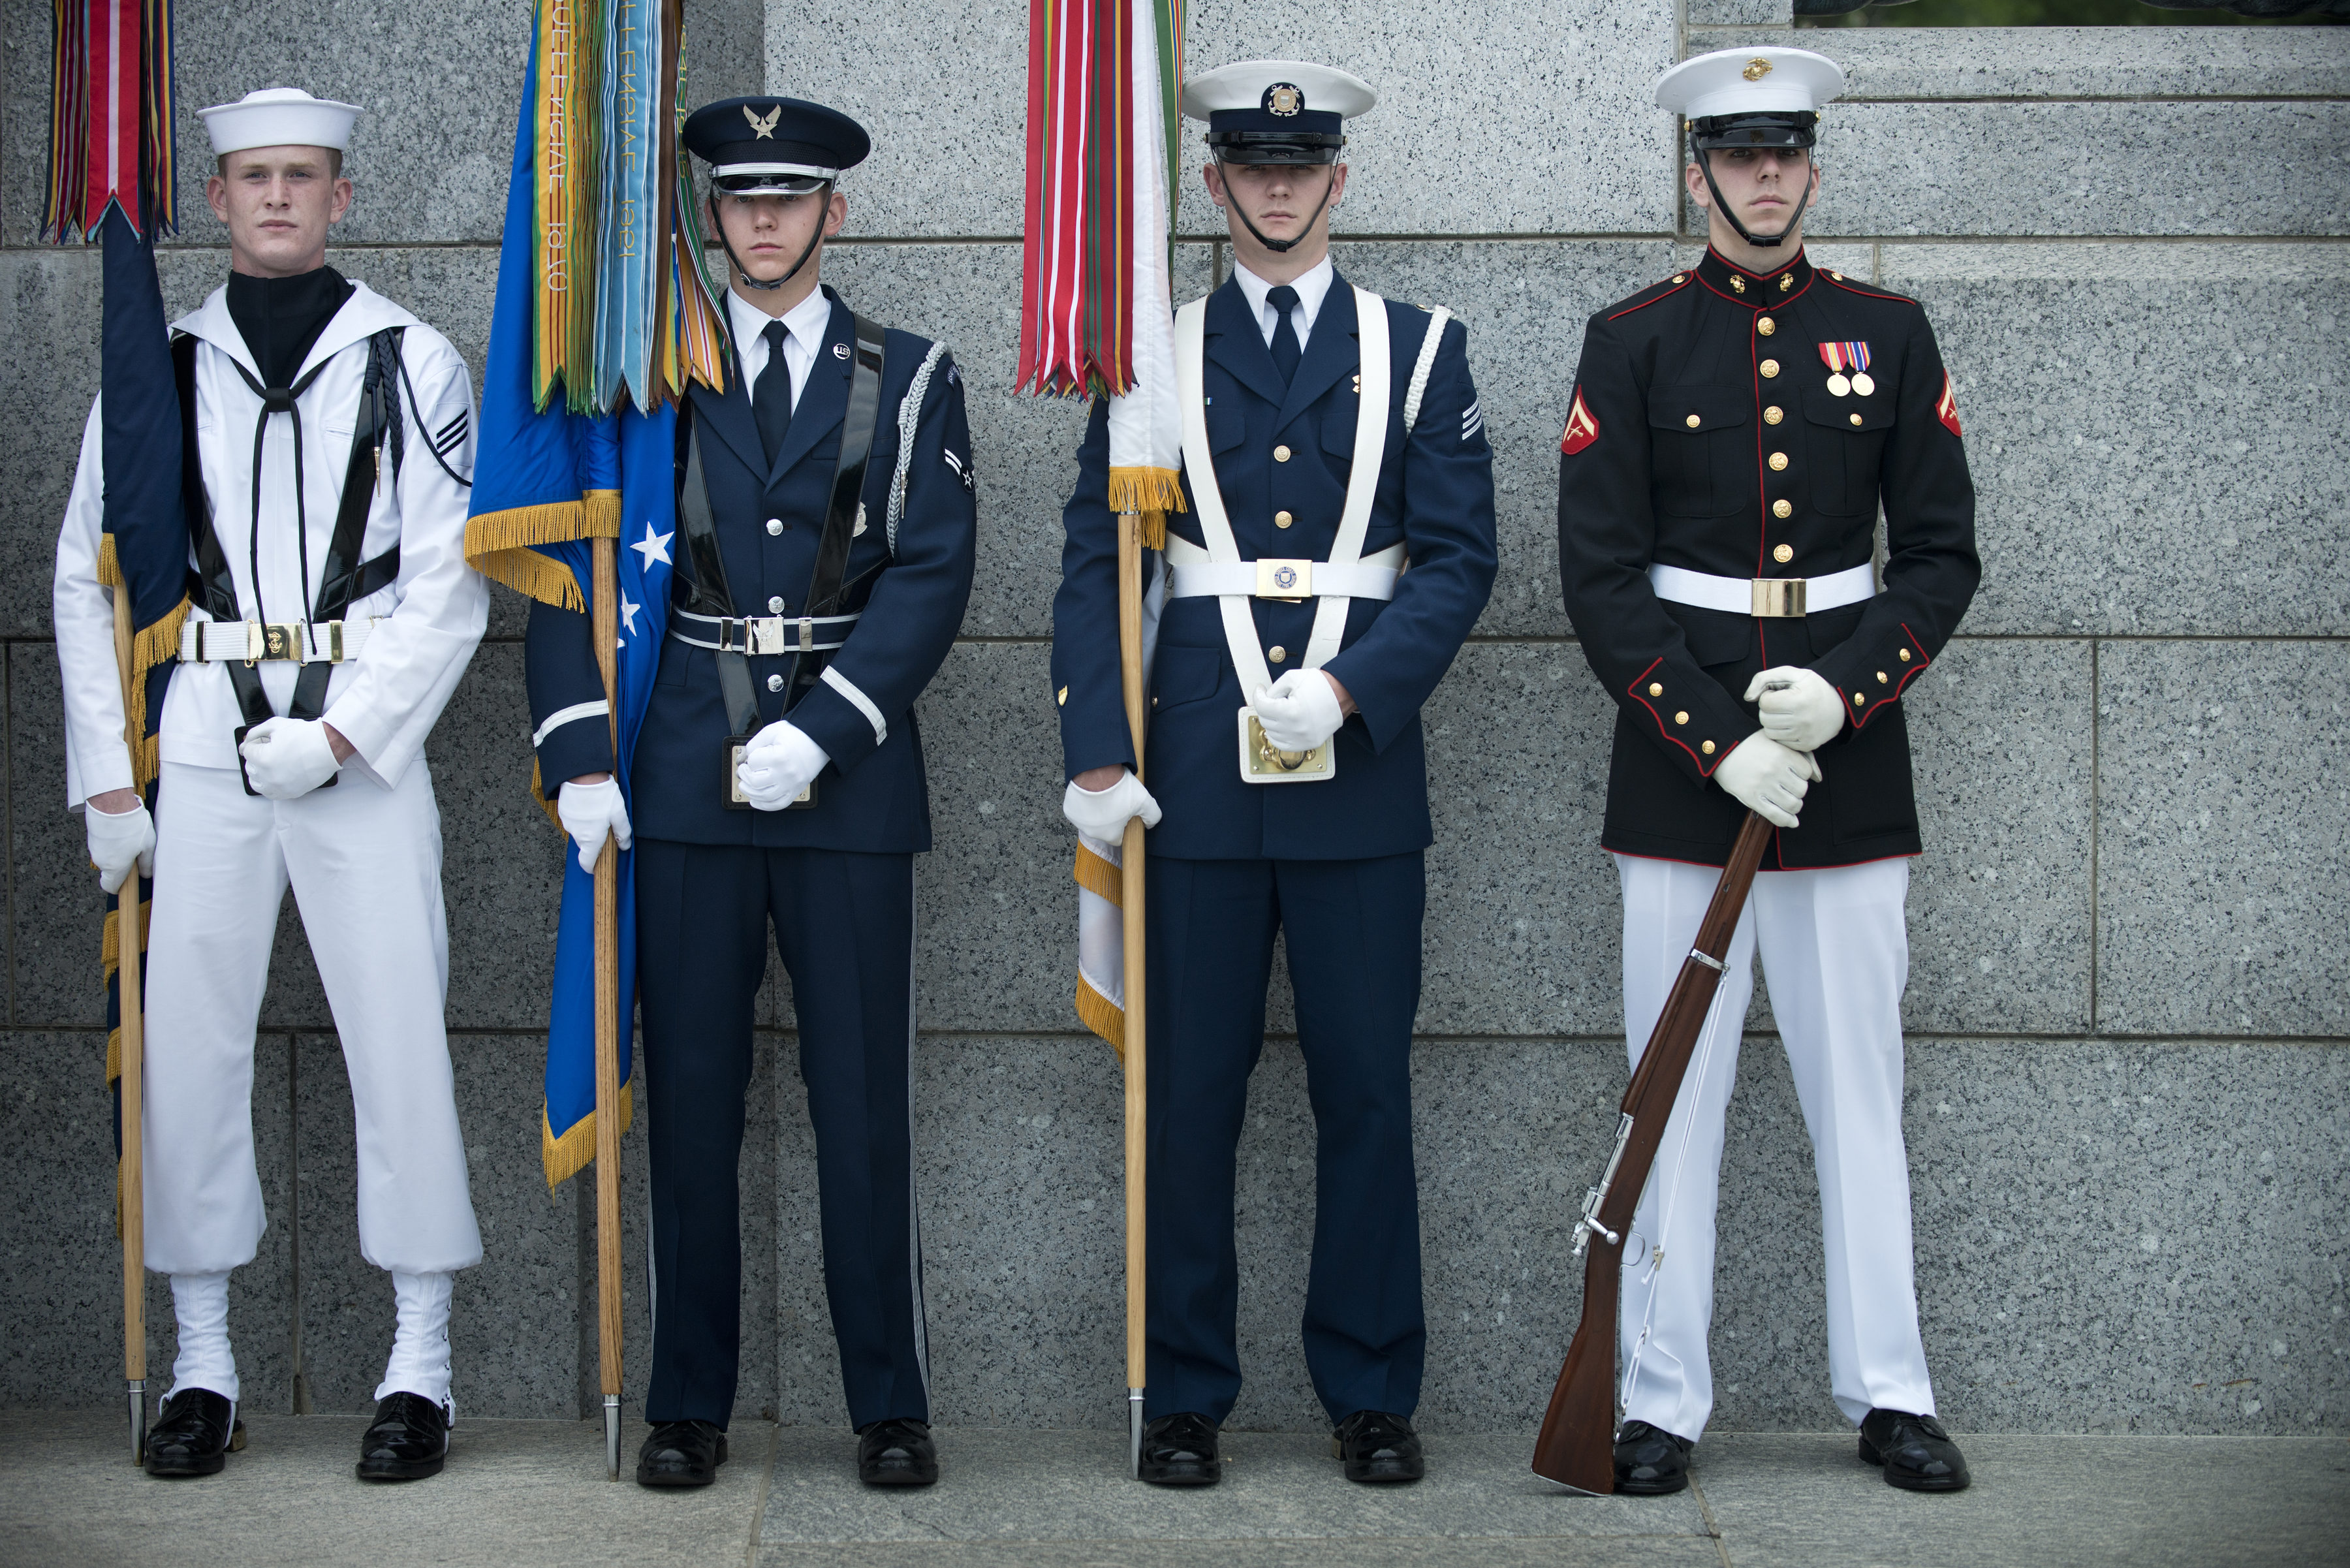 A US Military color guard stands ready f